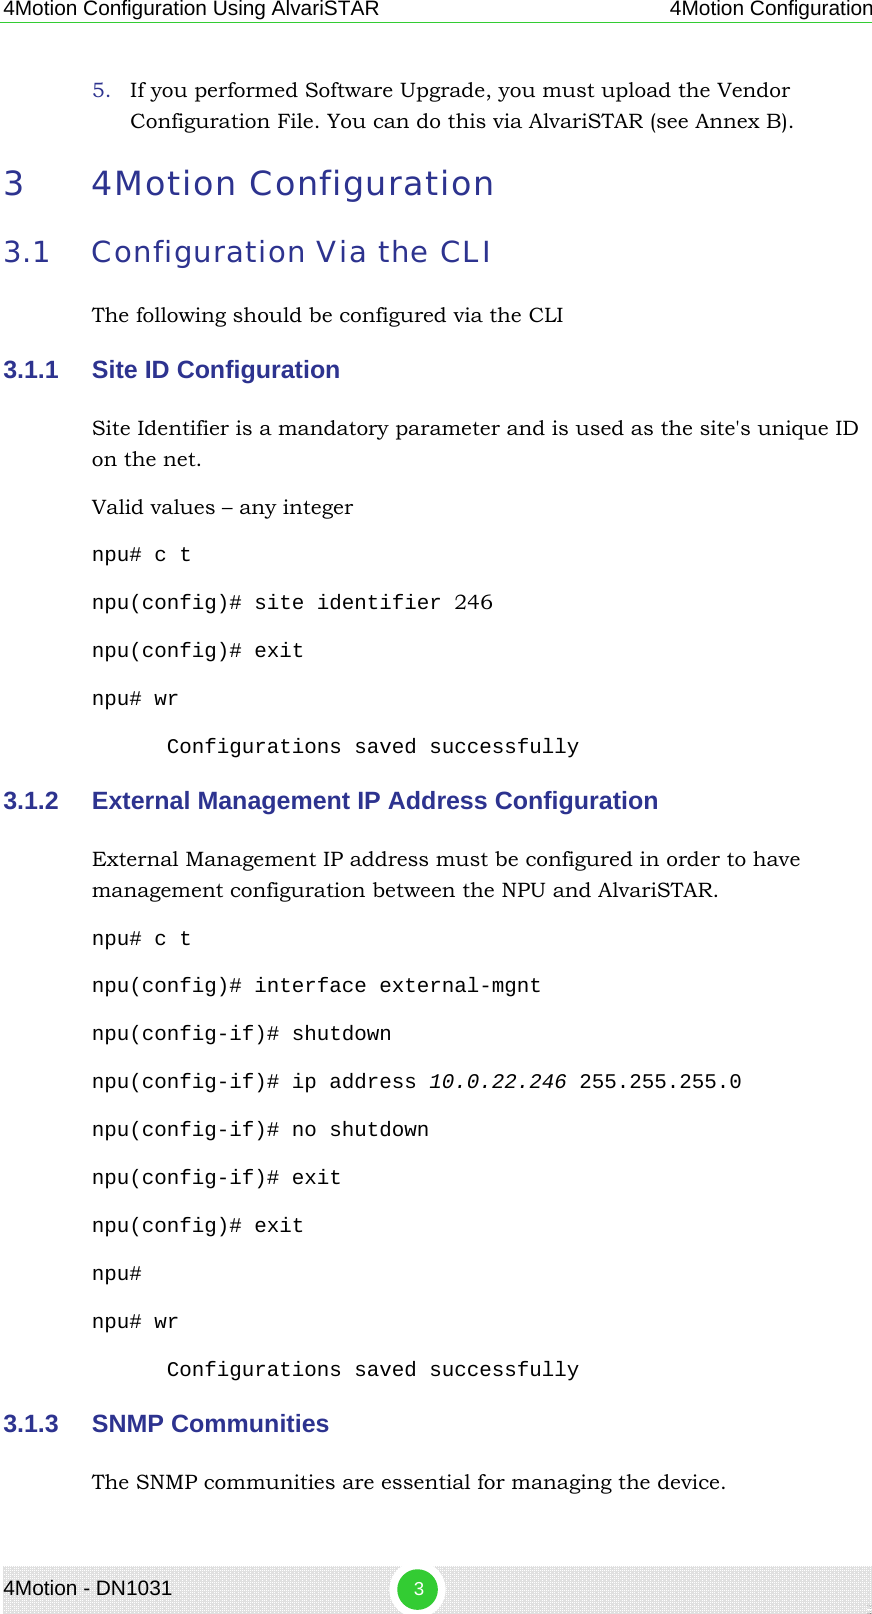 4Motion Configuration Using AlvariSTAR 4Motion Configuration 5. If you performed Software Upgrade, you must upload the Vendor Configuration File. You can do this via AlvariSTAR (see Annex B). 3 4Motion Configuration 3.1 Configuration Via the CLI The following should be configured via the CLI 3.1.1  Site ID Configuration  Site Identifier is a mandatory parameter and is used as the site&apos;s unique ID on the net.   Valid values – any integer  npu# c t npu(config)# site identifier 246 npu(config)# exit npu# wr Configurations saved successfully 3.1.2  External Management IP Address Configuration External Management IP address must be configured in order to have management configuration between the NPU and AlvariSTAR. npu# c t npu(config)# interface external-mgnt npu(config-if)# shutdown npu(config-if)# ip address 10.0.22.246 255.255.255.0 npu(config-if)# no shutdown npu(config-if)# exit npu(config)# exit npu# npu# wr Configurations saved successfully 3.1.3  SNMP Communities The SNMP communities are essential for managing the device. 4Motion - DN1031  3 